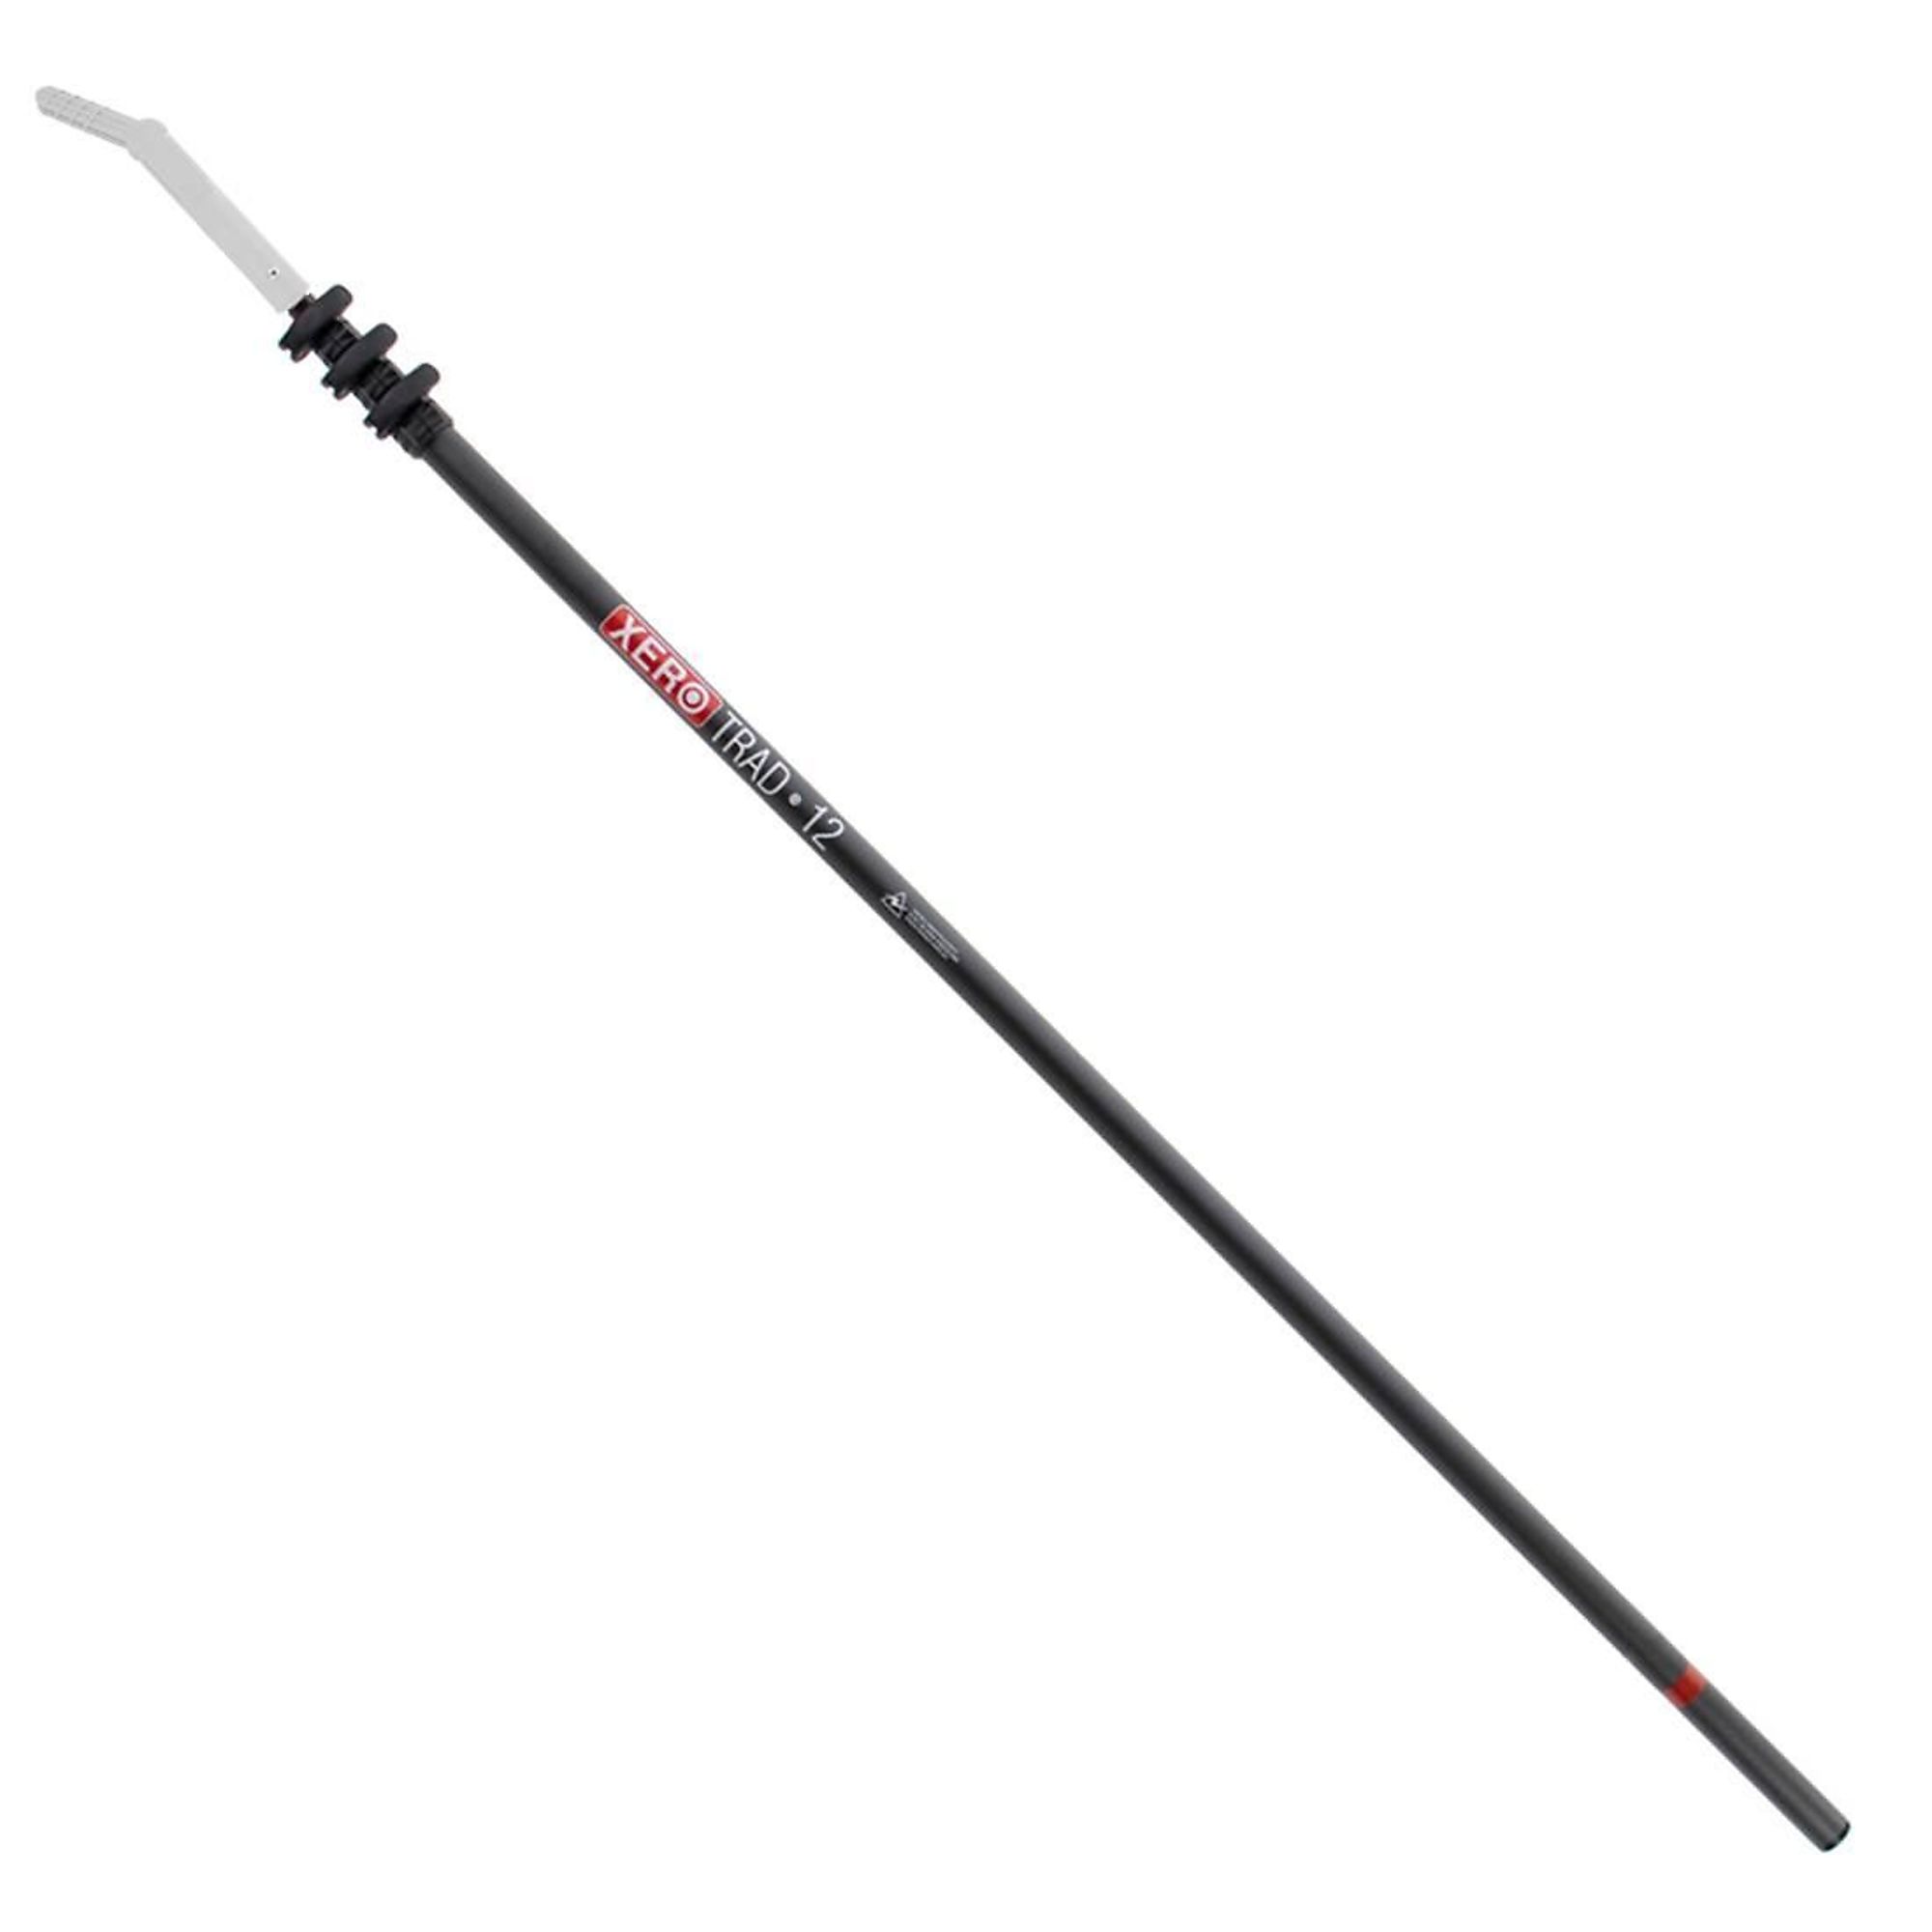 XERO, Trad Pole 2.0 Wagtail Tip - 12ft., Model 209-20-316